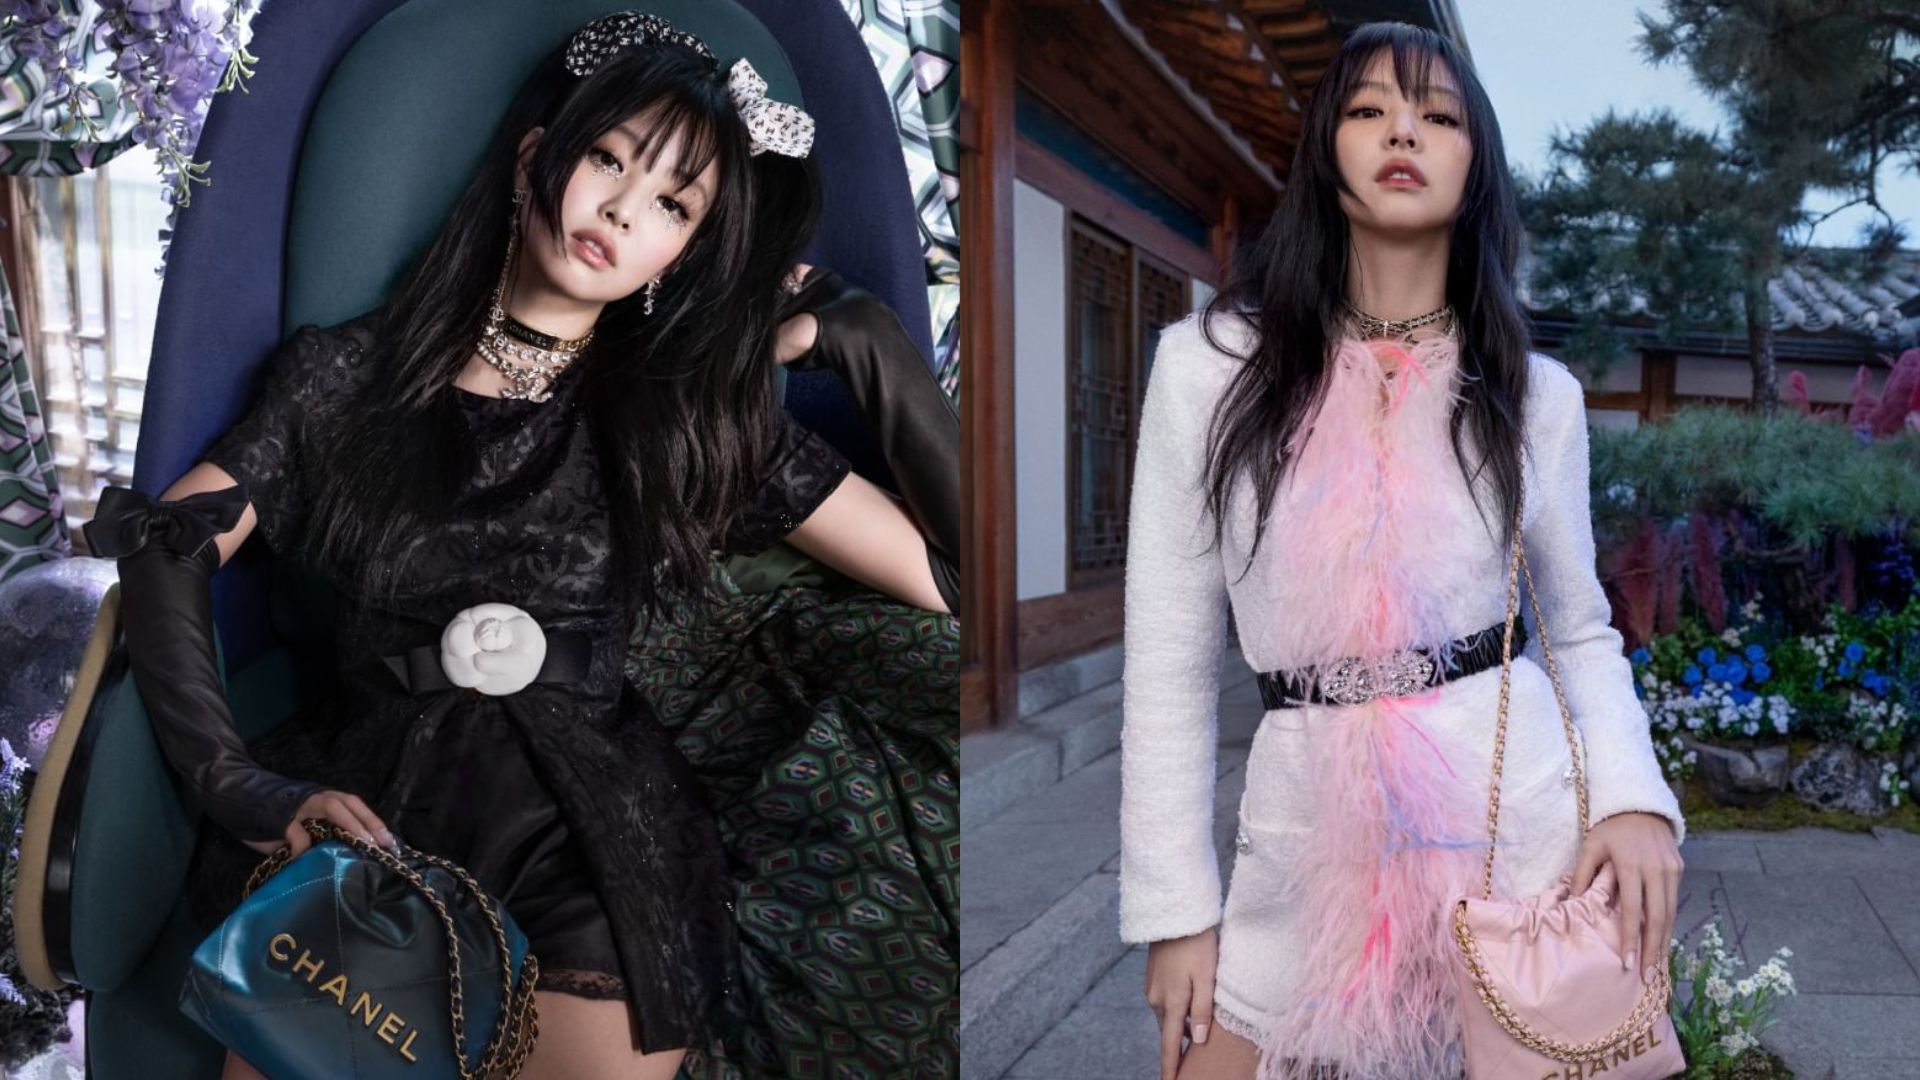 Classic Chanel Bags Owned by Blackpink’s Jennie That Scream Luxury